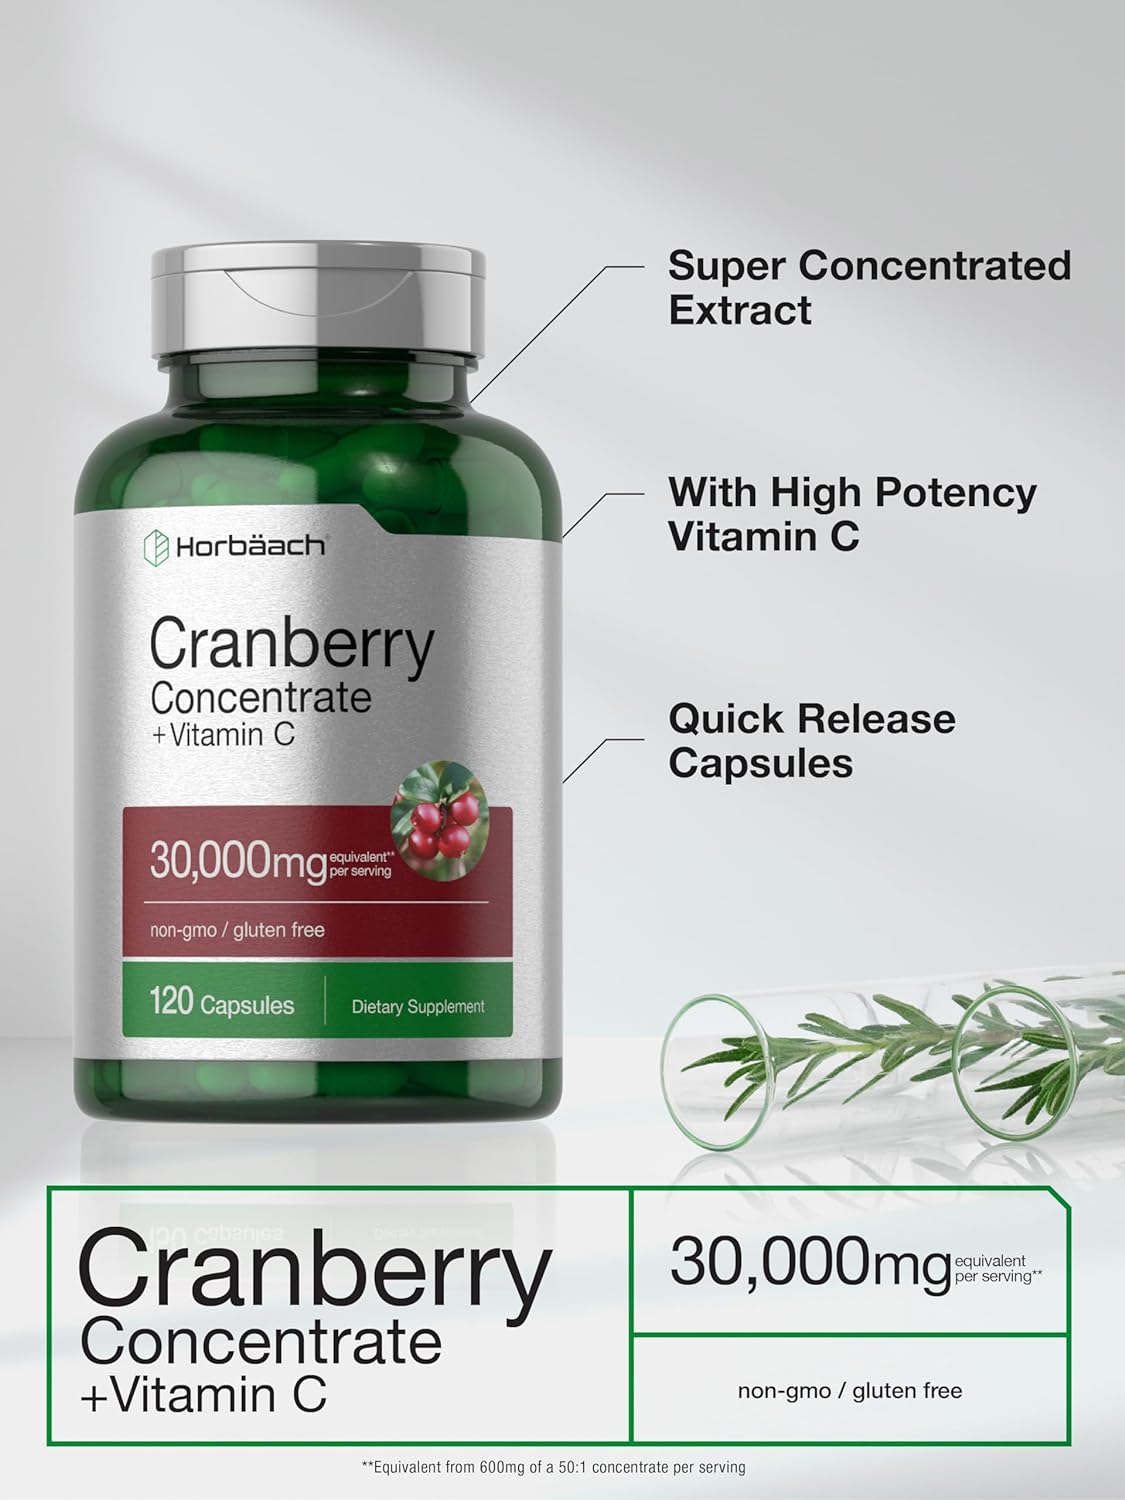 Cranberry Concentrate Extract Pills + Vitamin C | 30,000mg | 120 Capsules | Triple Strength Ultimate Potency Formula | Non-GMO and Gluten Free Cranberry Supplement | by Horbaach